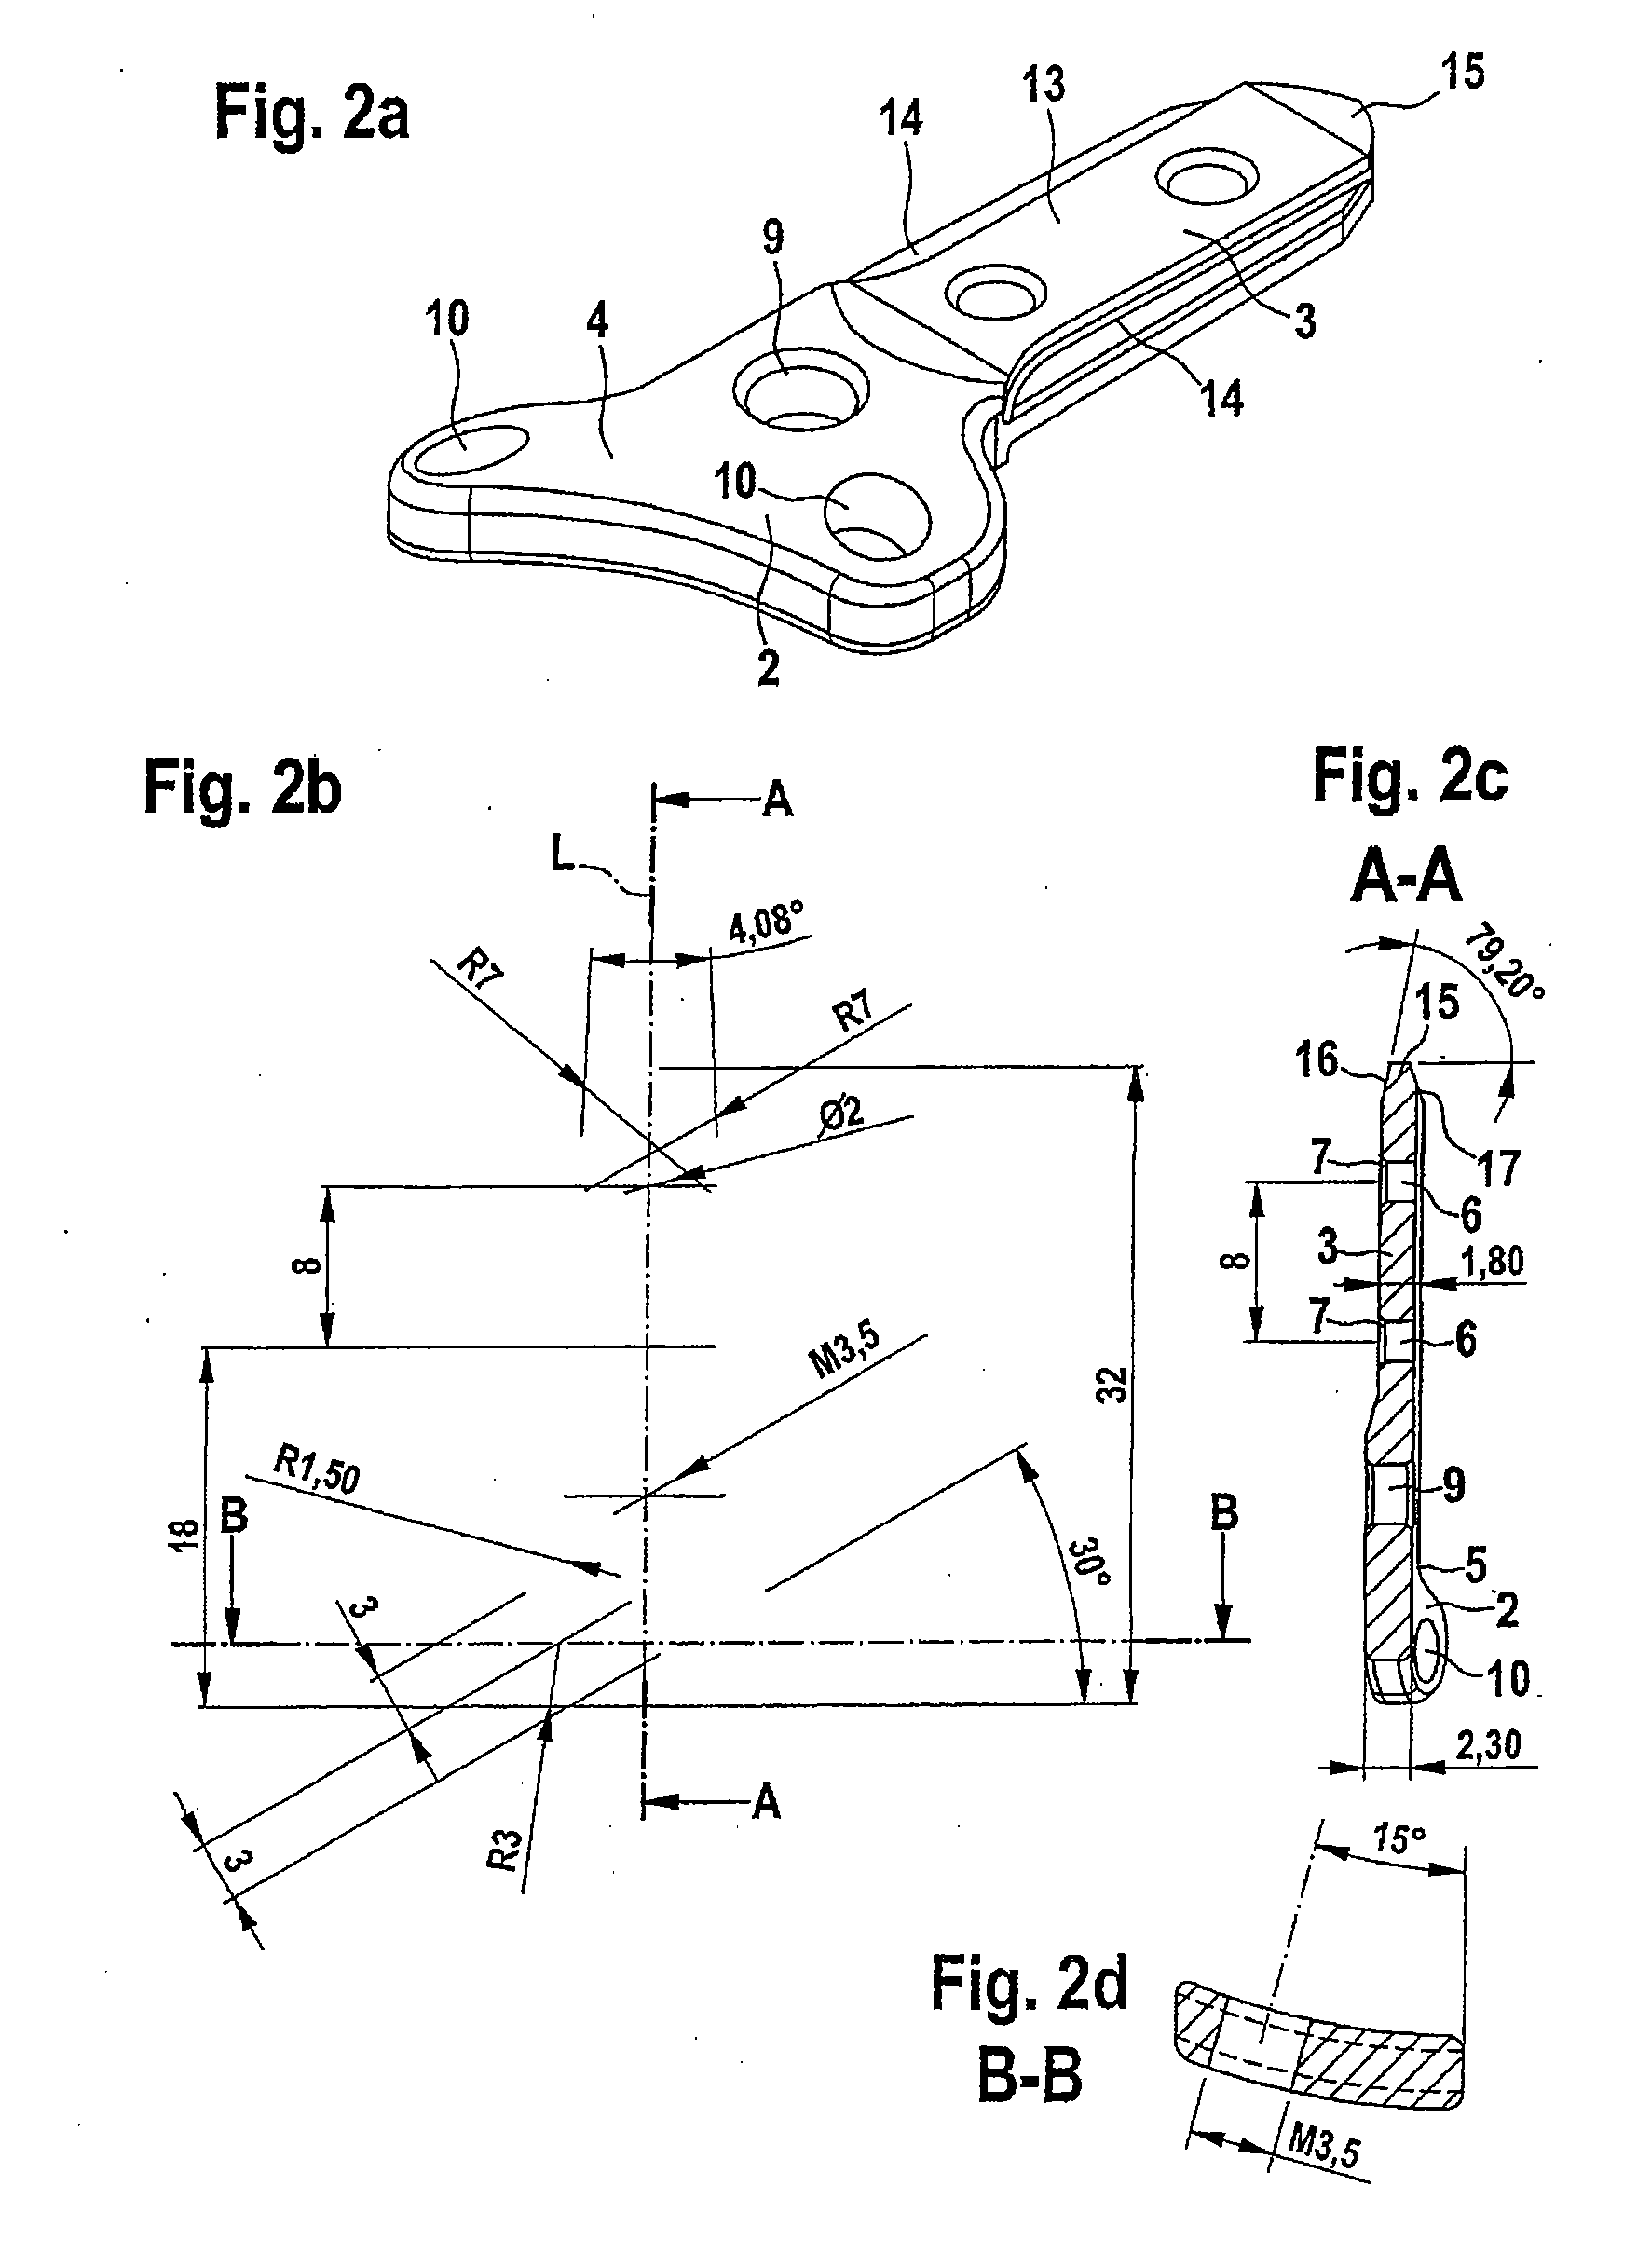 Foot surgery bone plate, and system comprising bone plate and insertion aid